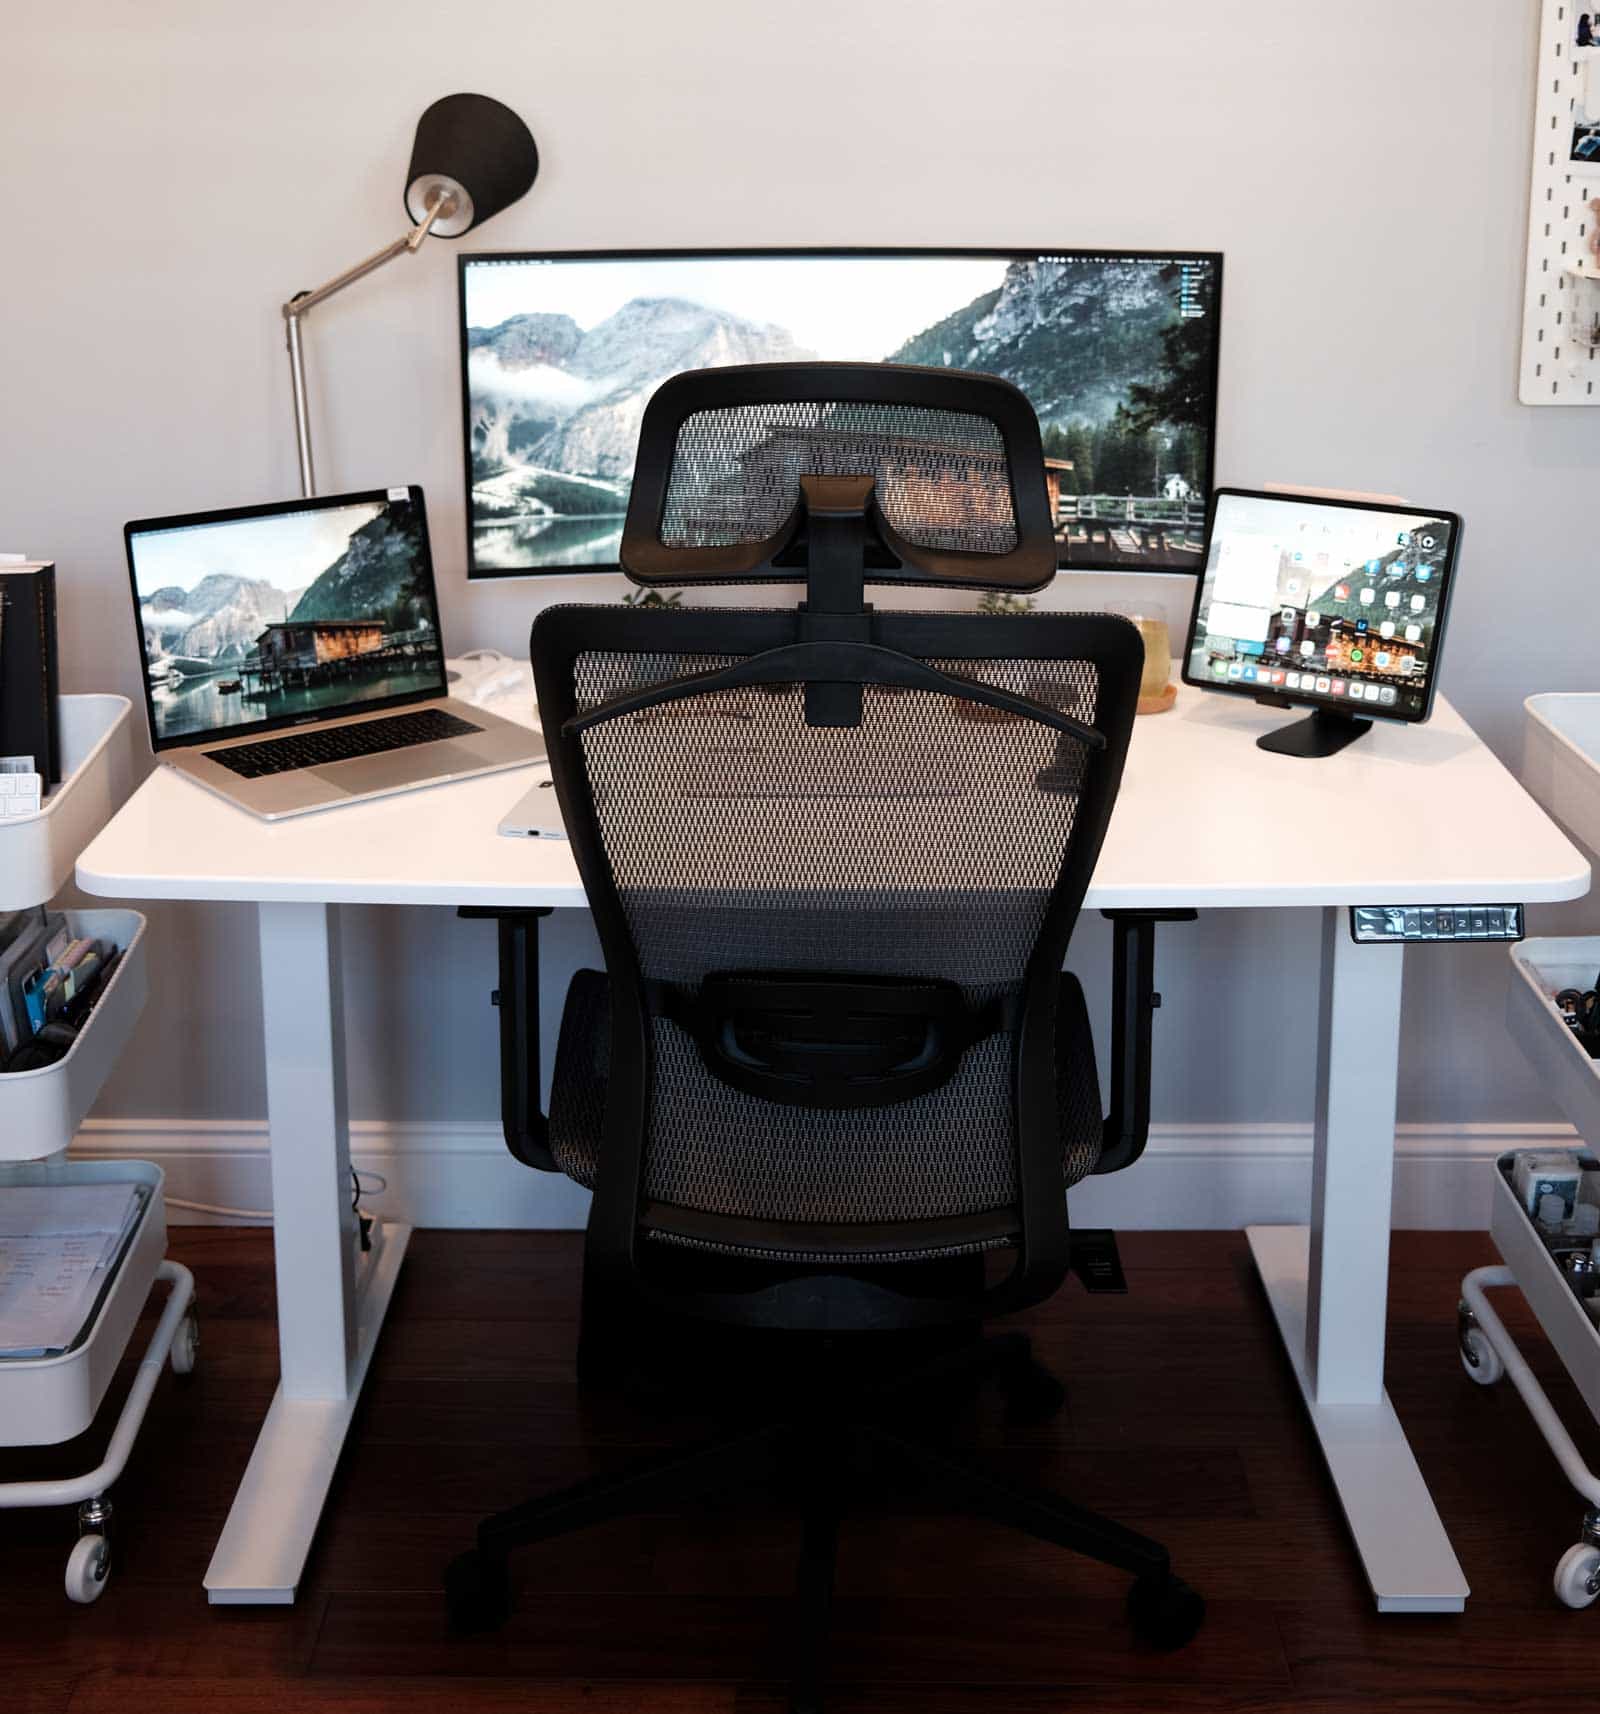 What Factors Affect The Price Of A Computer Desk?